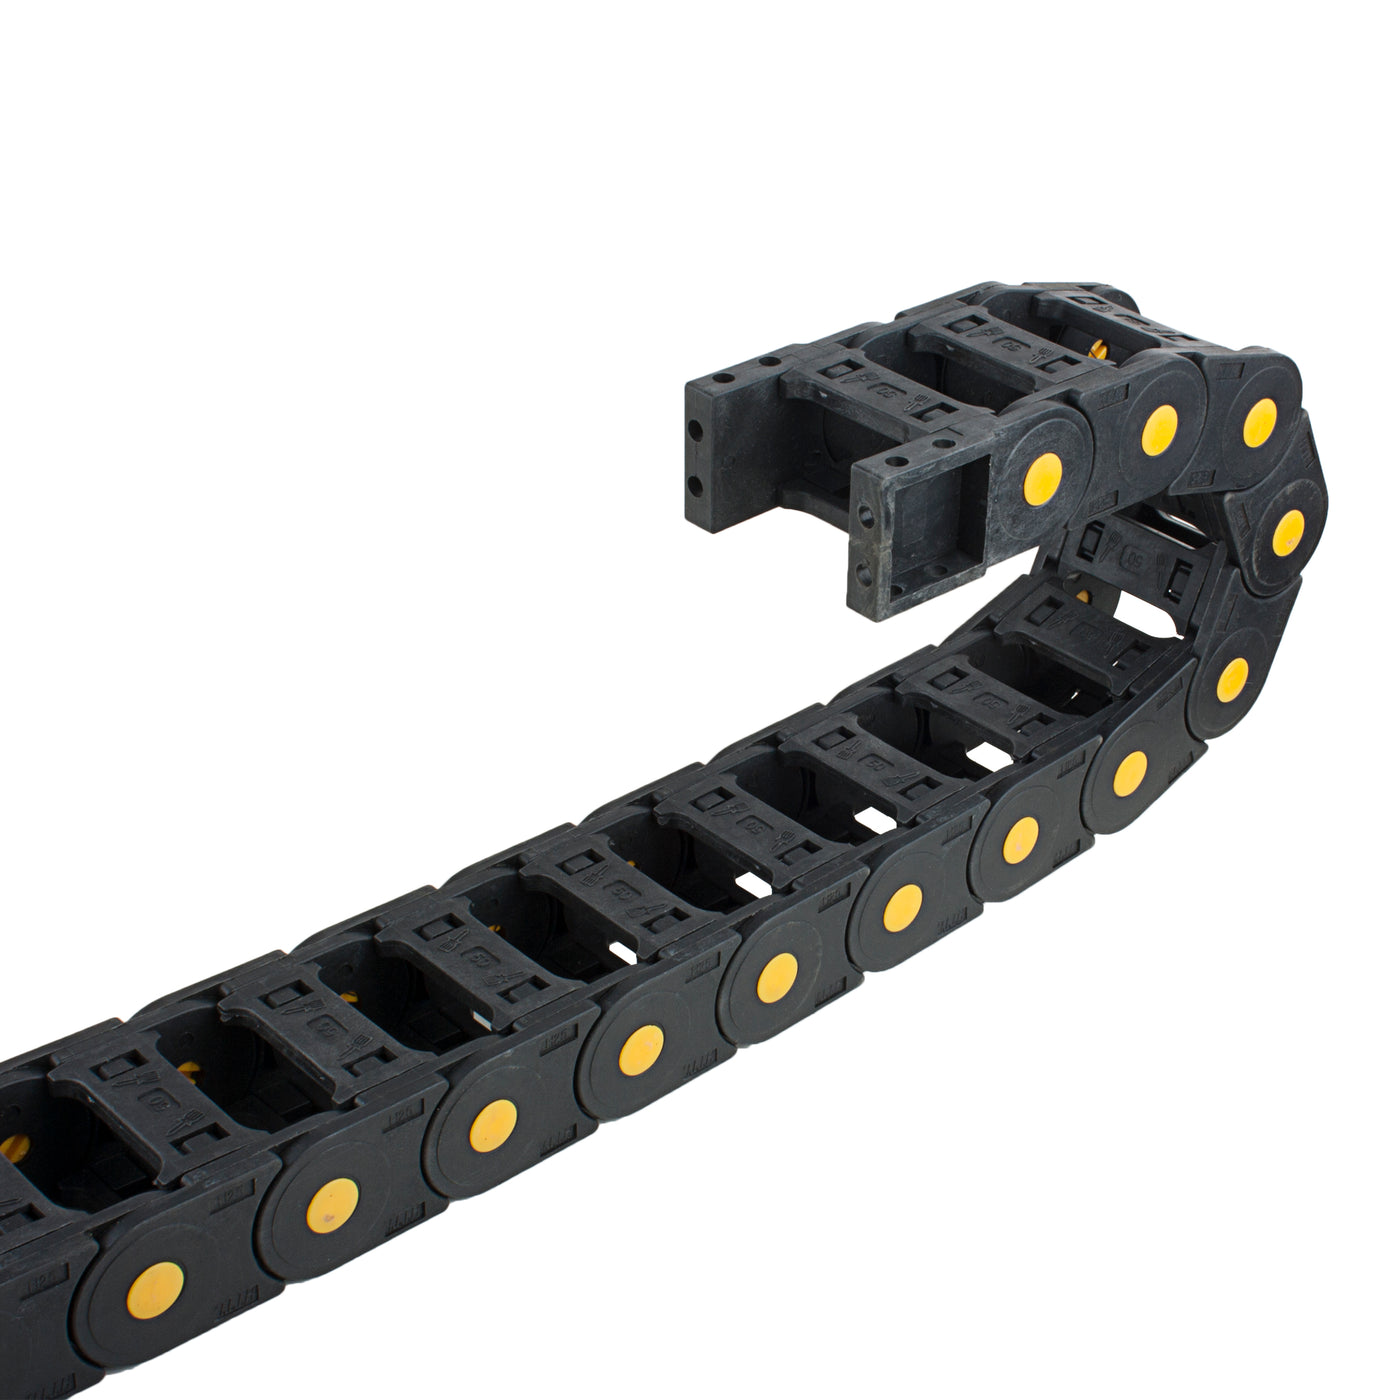 uxcell Uxcell R55 25mm x 50mm Black Plastic Open Type Cable Wire Carrier Drag Chain 1M Length for CNC